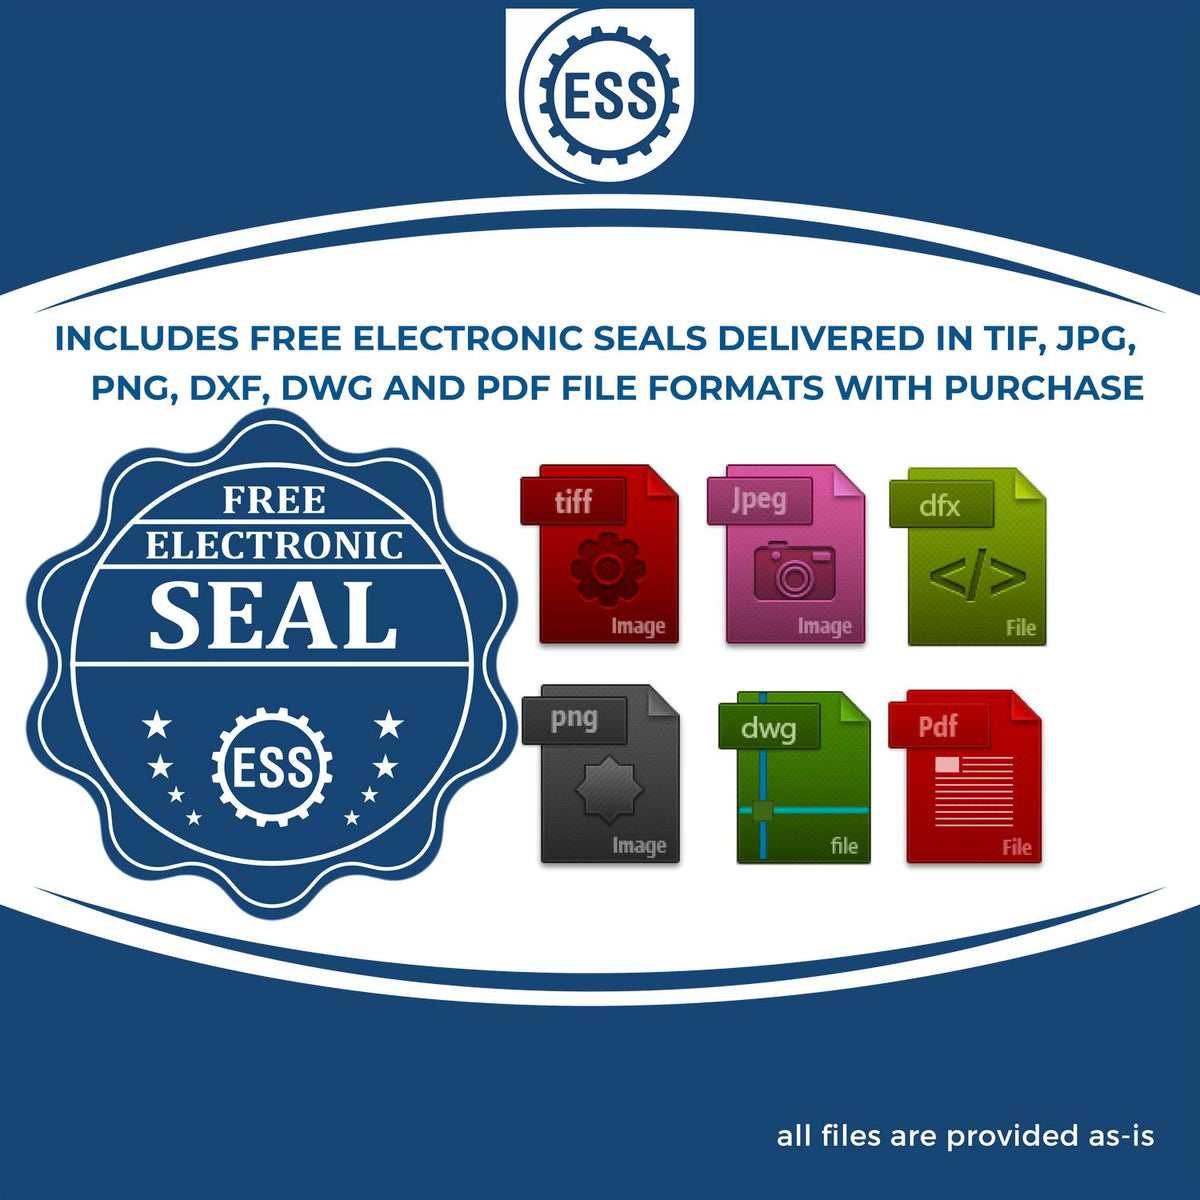 An infographic for the free electronic seal for the Gift Hawaii Architect Seal illustrating the different file type icons such as DXF, DWG, TIF, JPG and PNG.